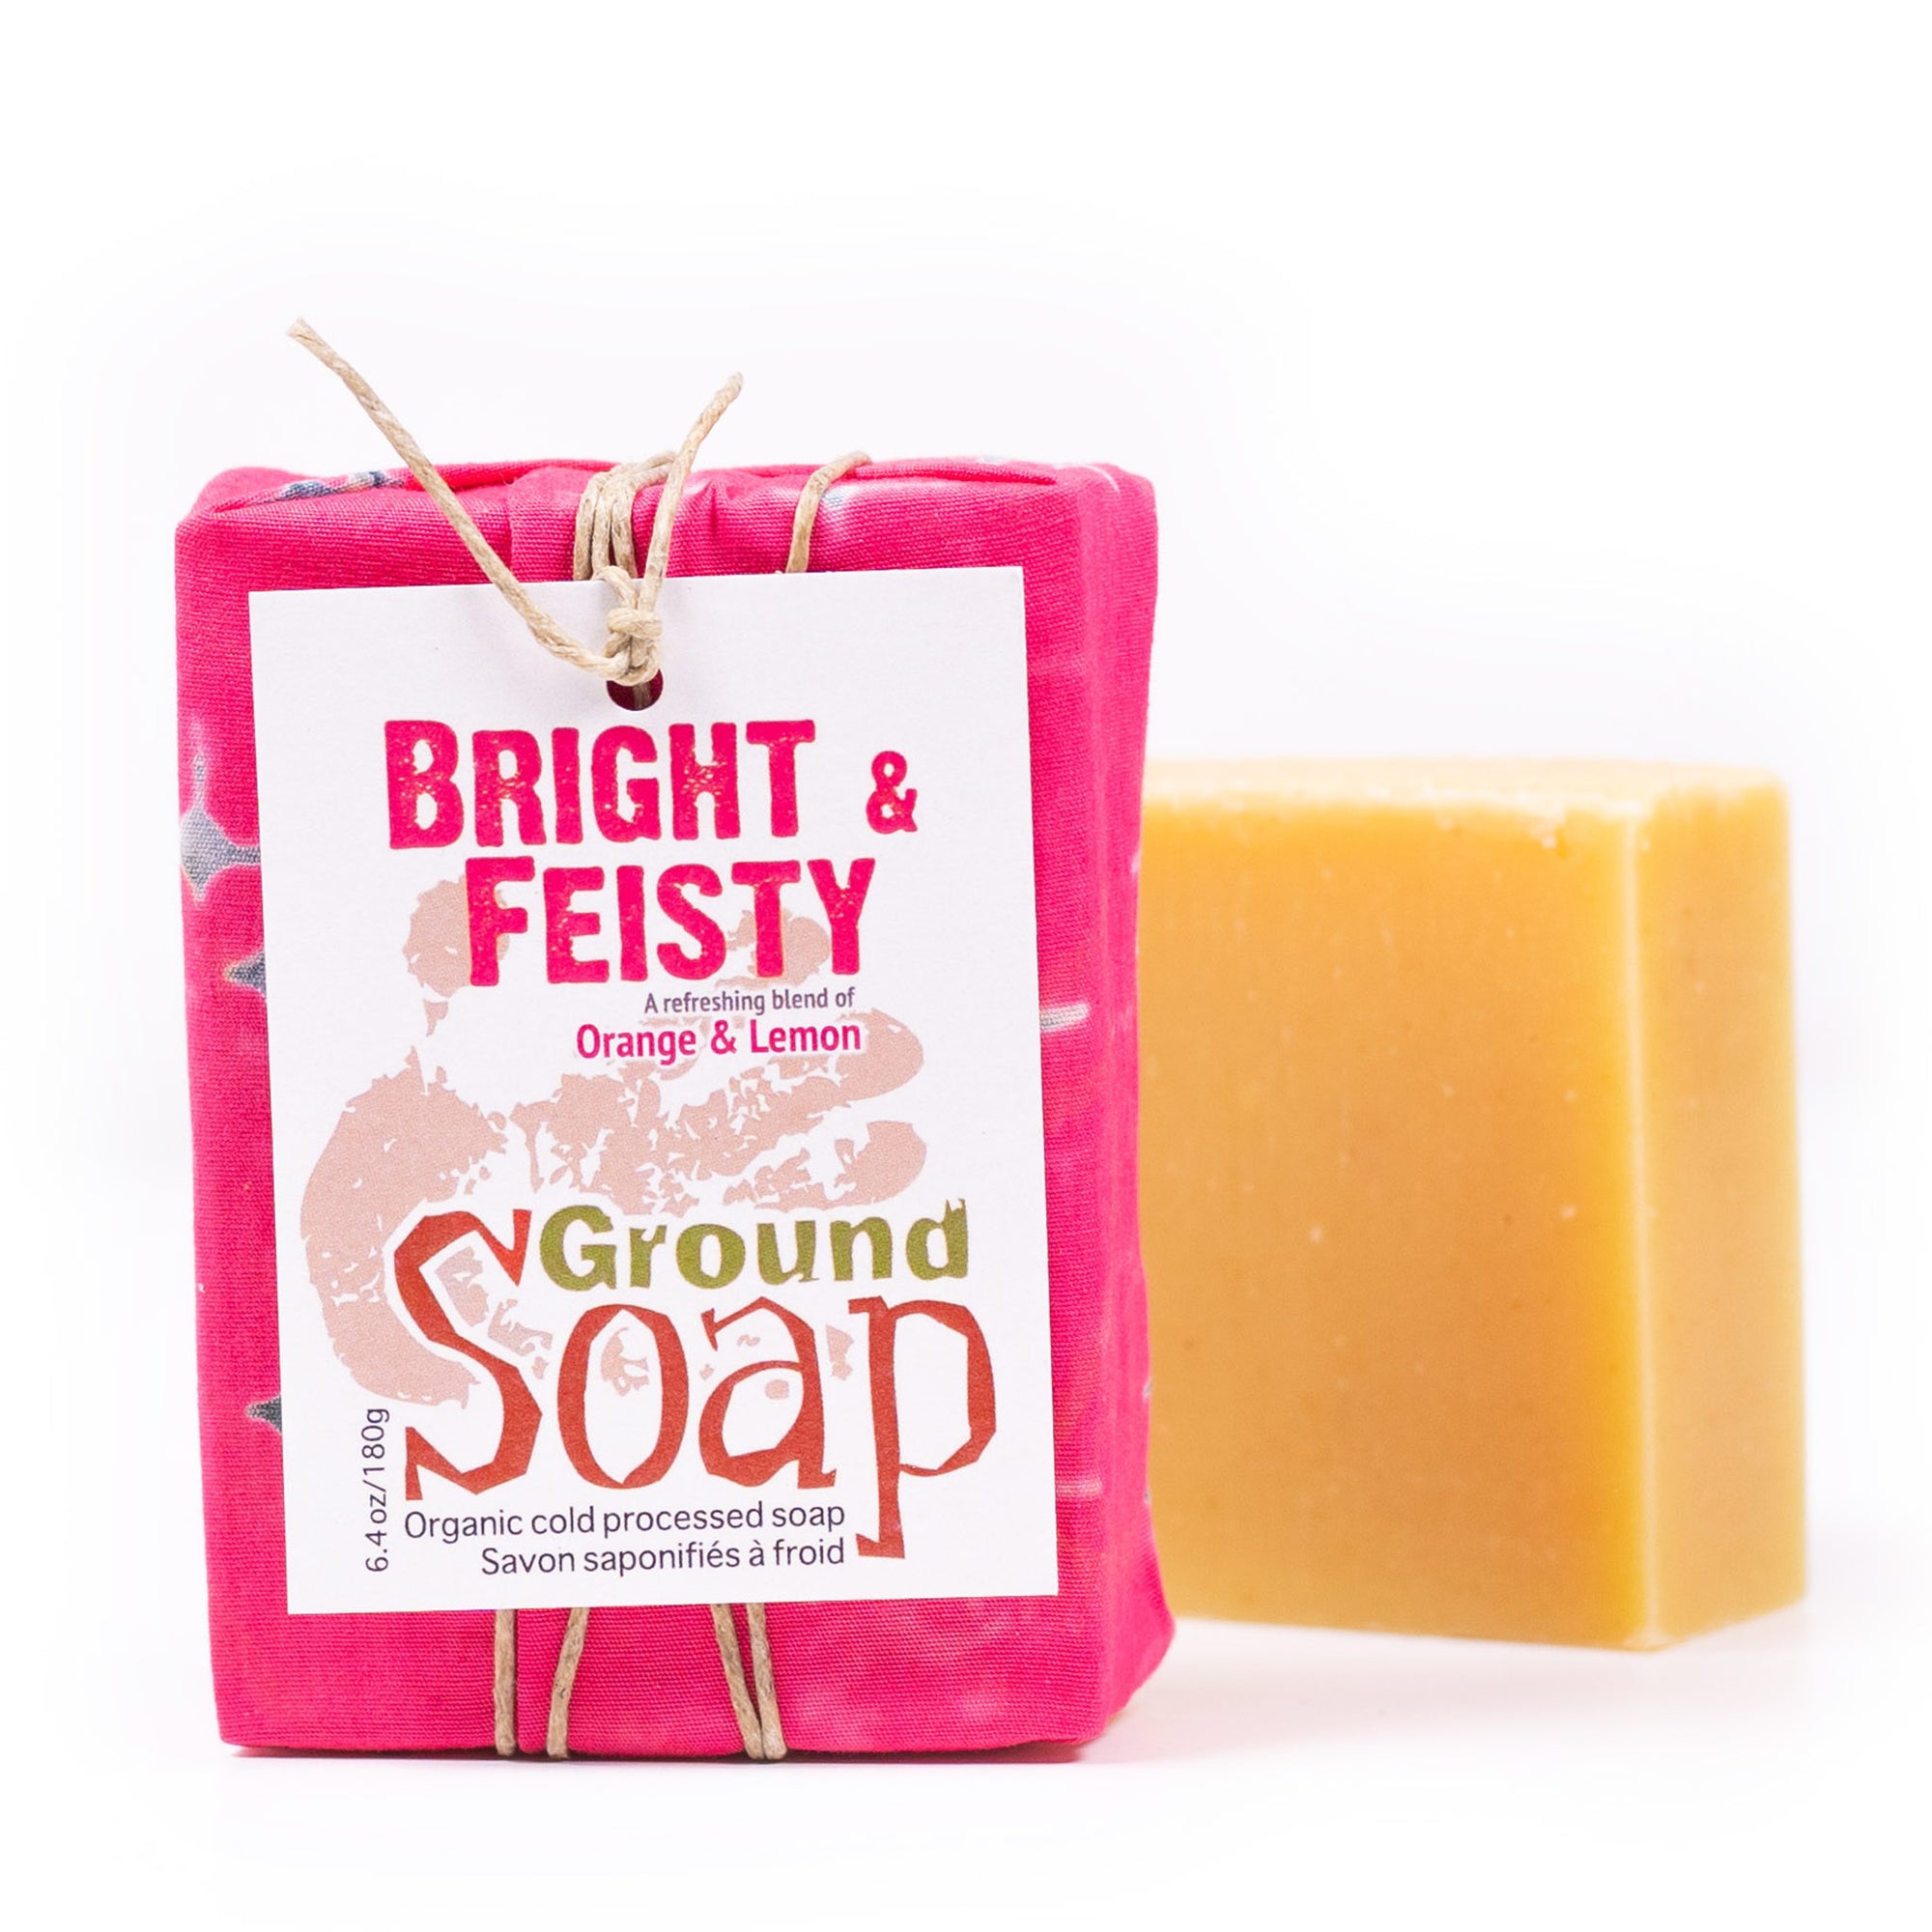 Bright & Feisty citrus essential oil blend organic bar soap from ground Soap.